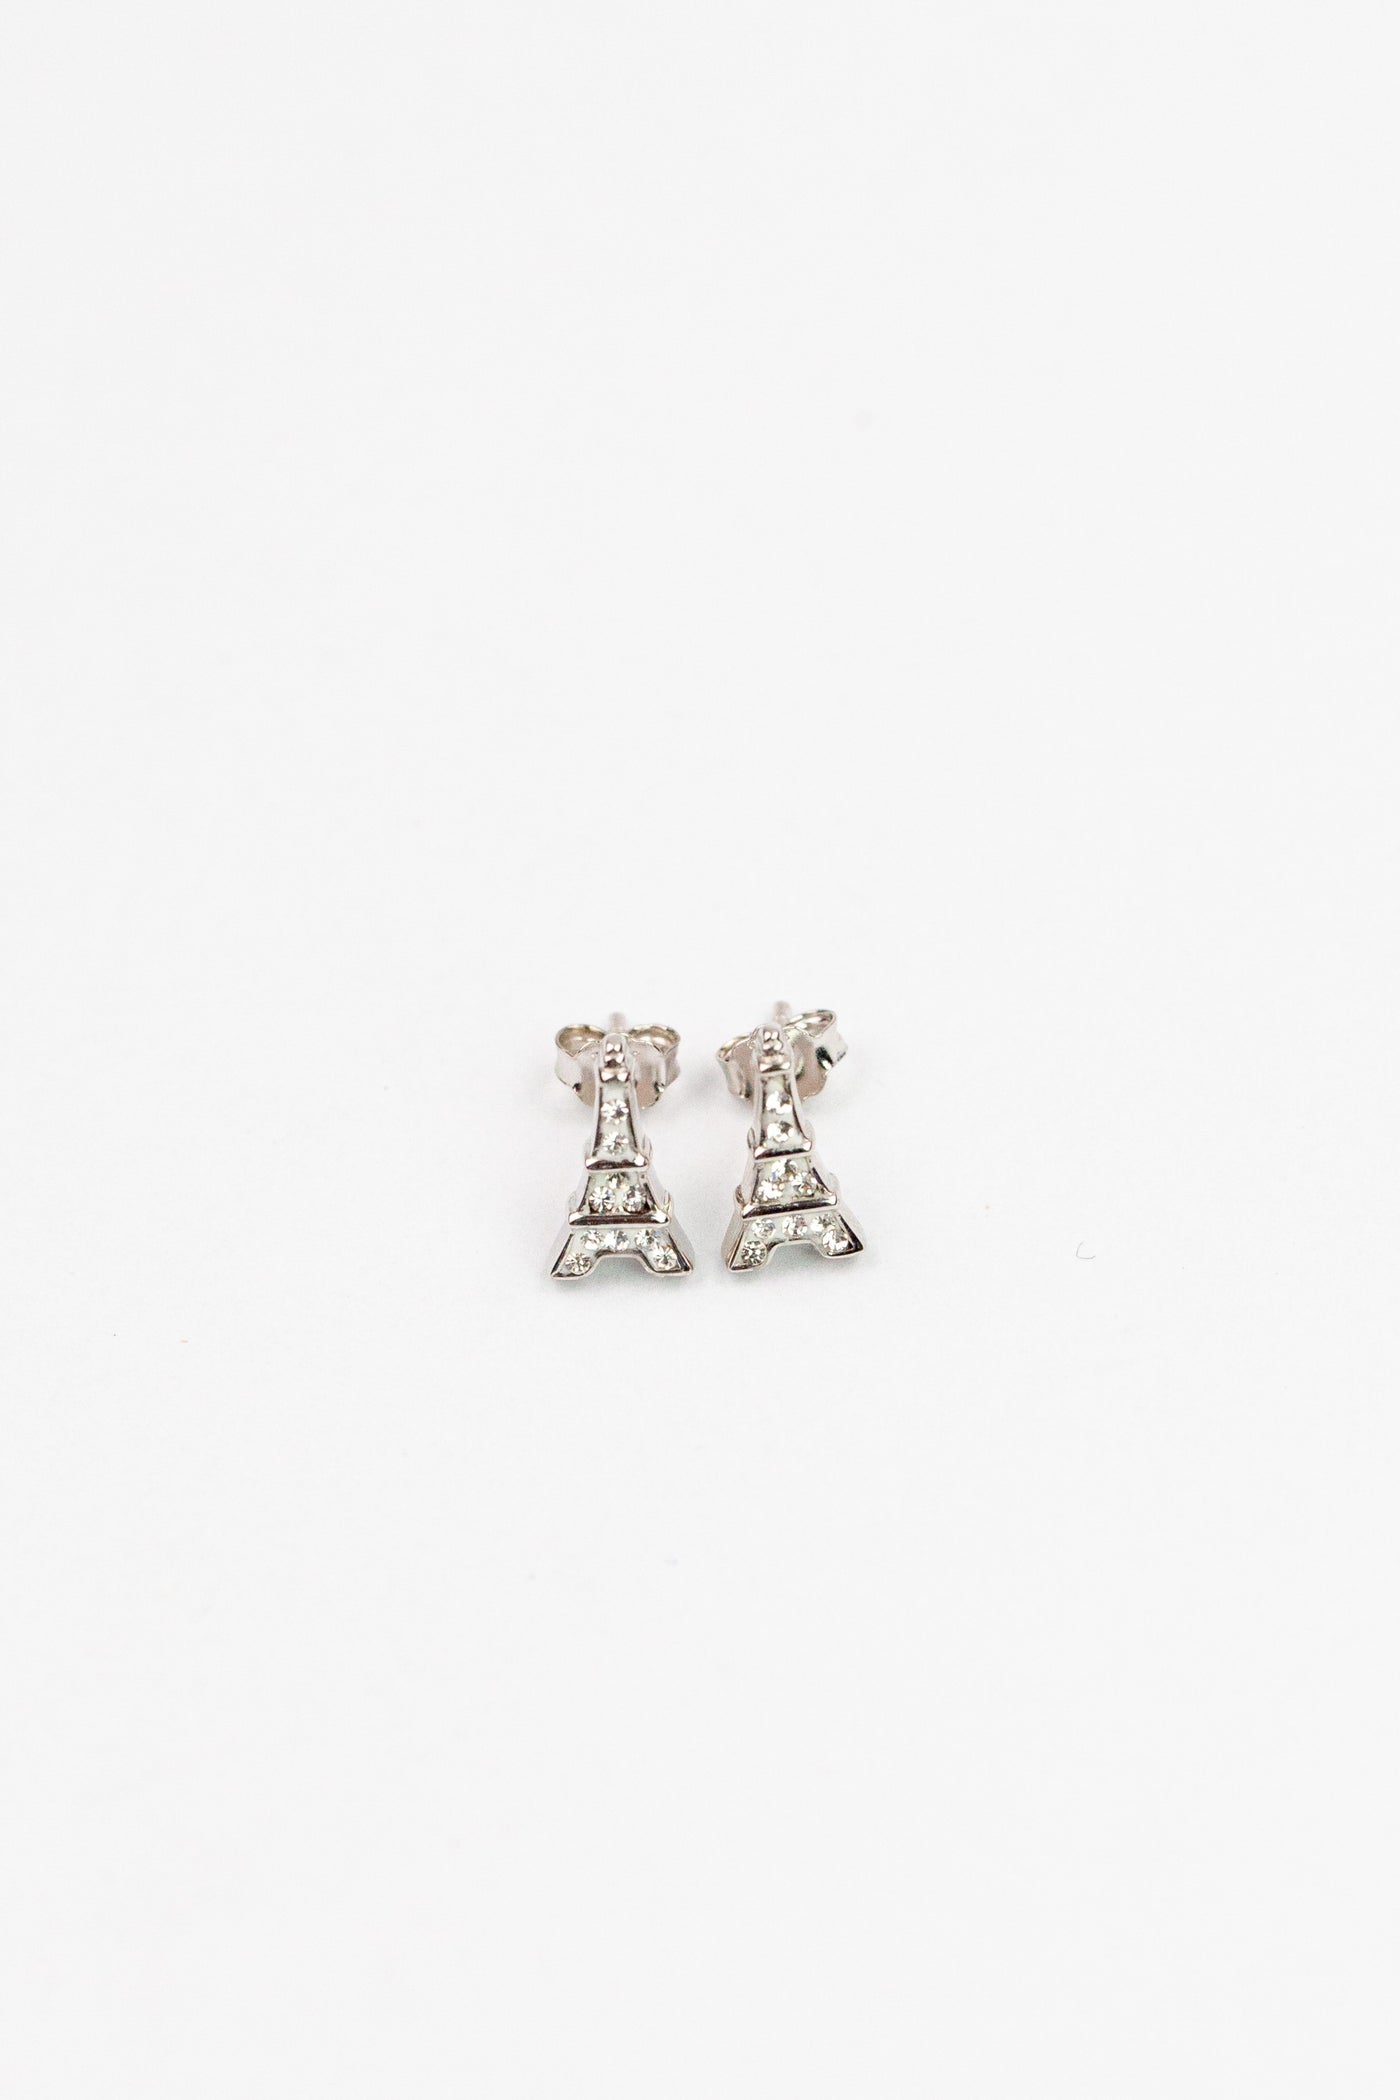 Eiffel Tower Clear Crystal Clear Sterling Silver Earrings | Annie and Sisters | sister stud earrings, for kids, children's jewelry, kid's jewelry, best friend